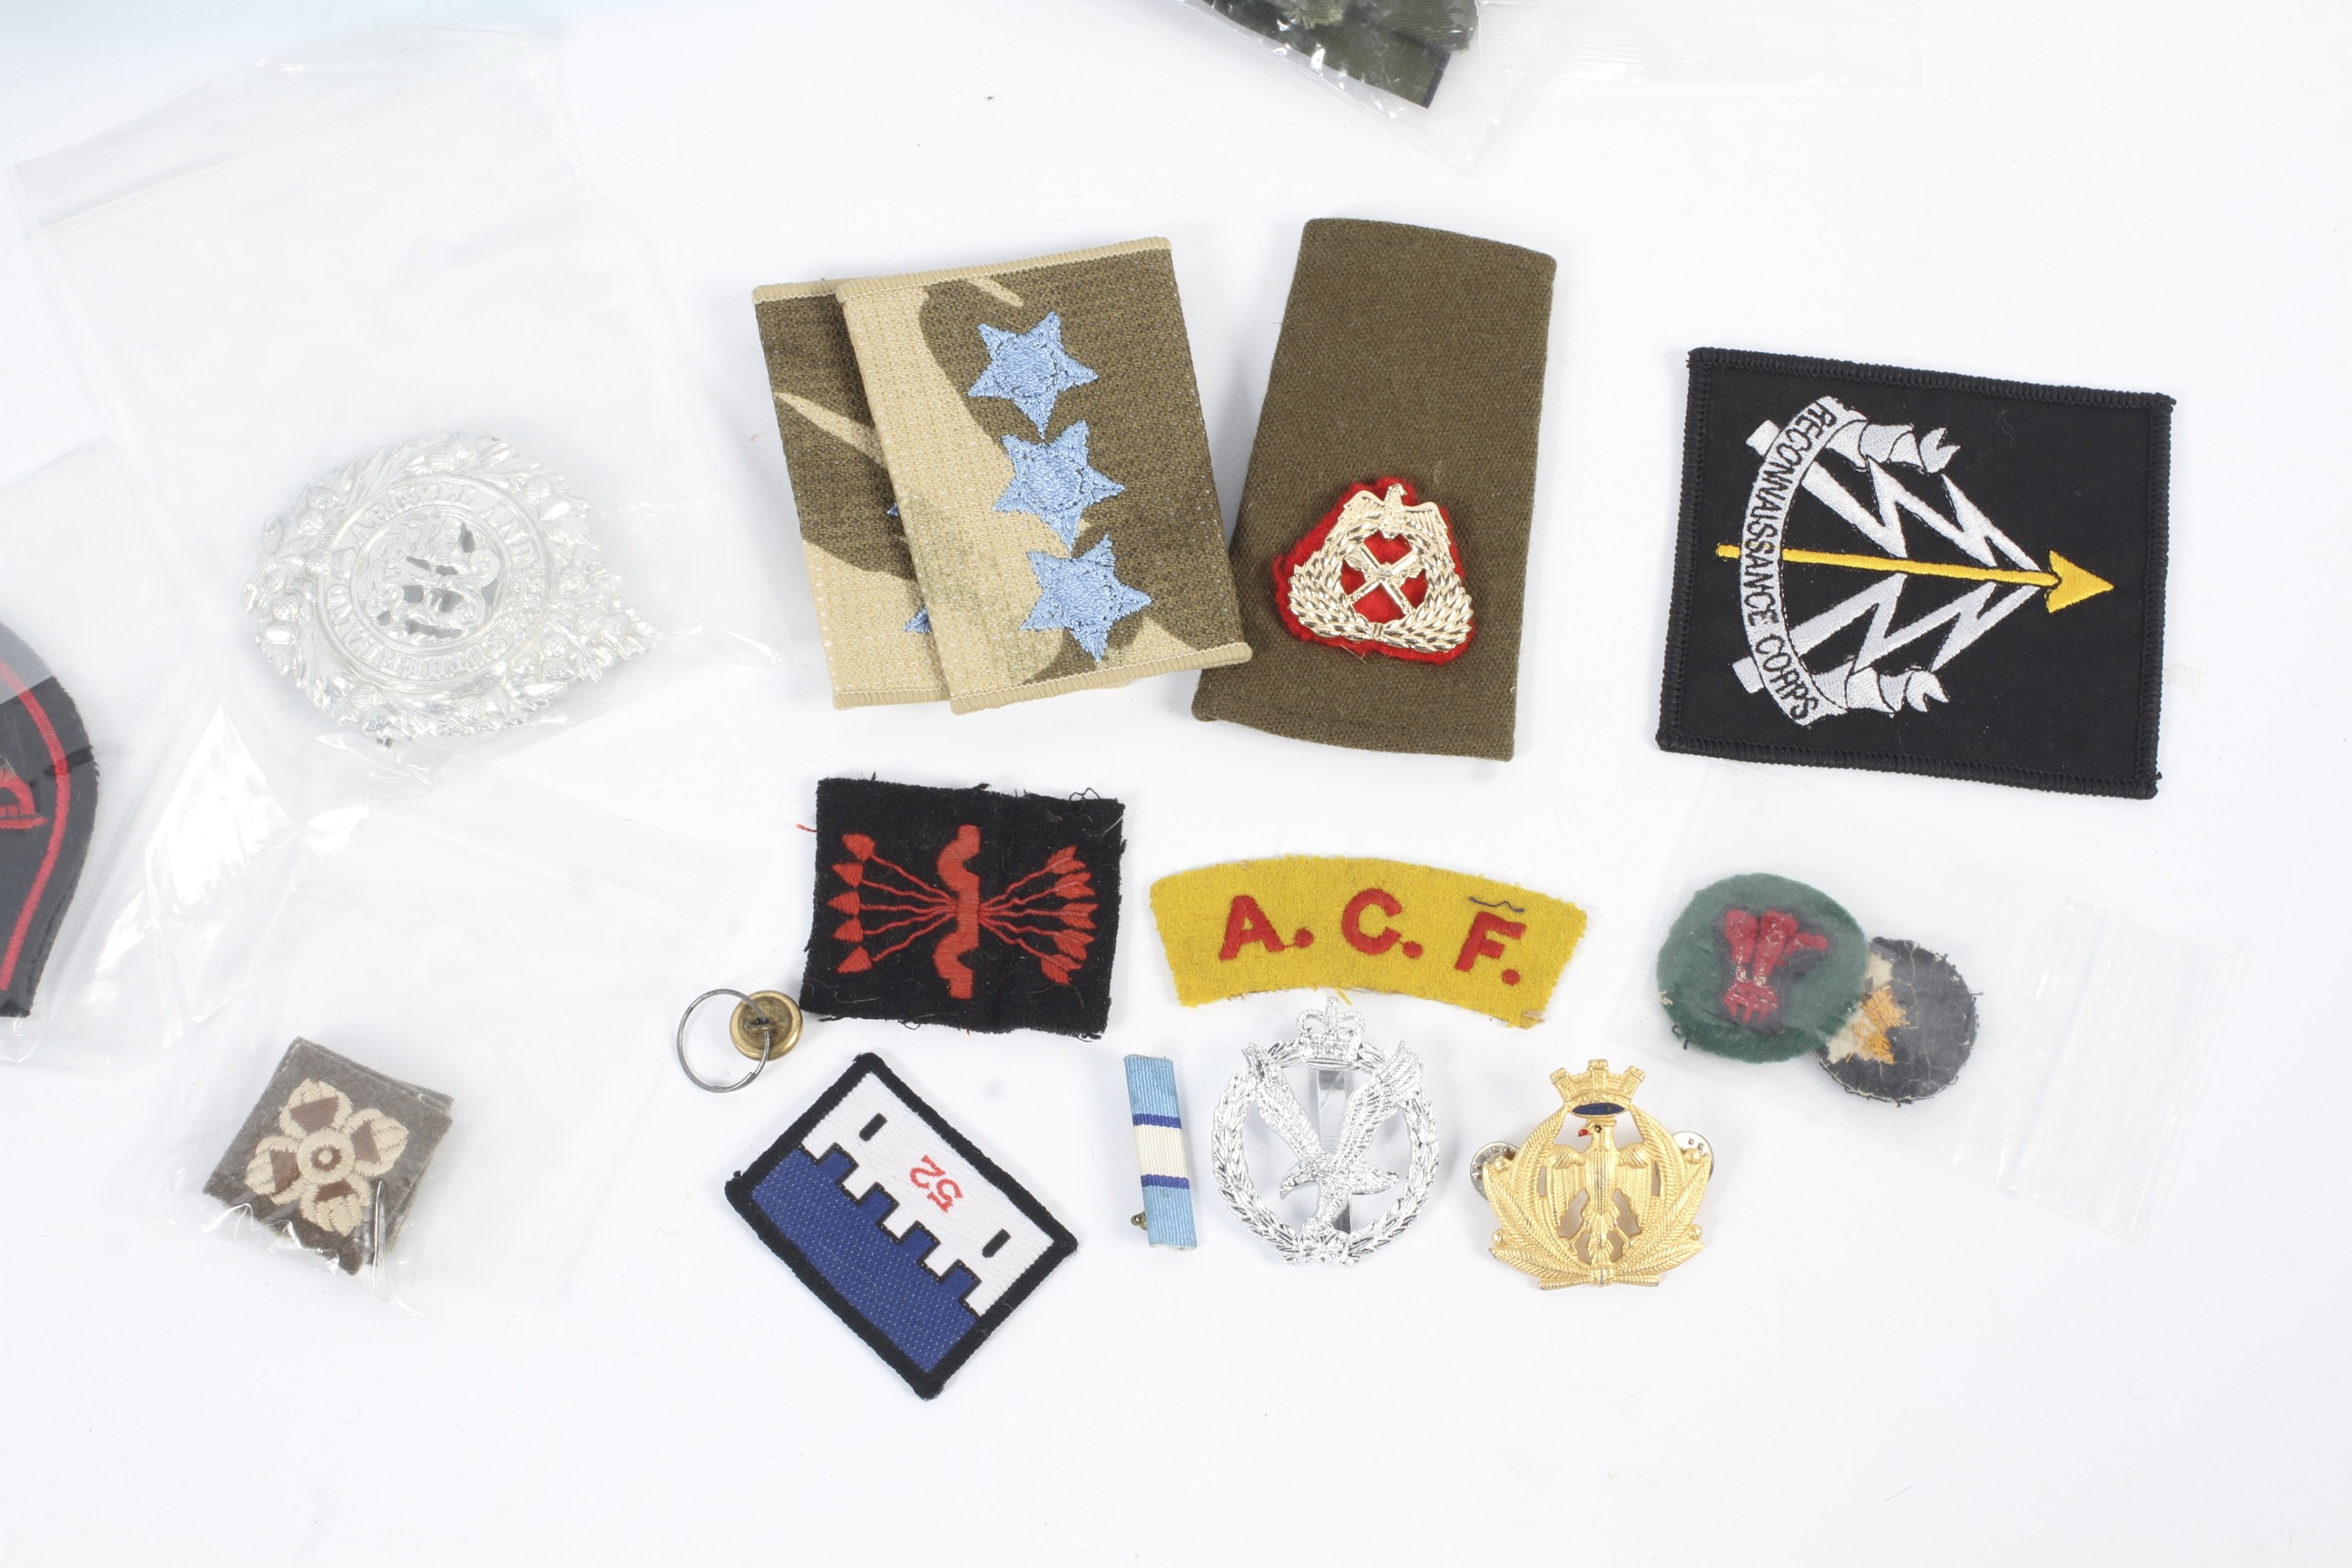 An extensive collection of fabric patches. - Image 4 of 9